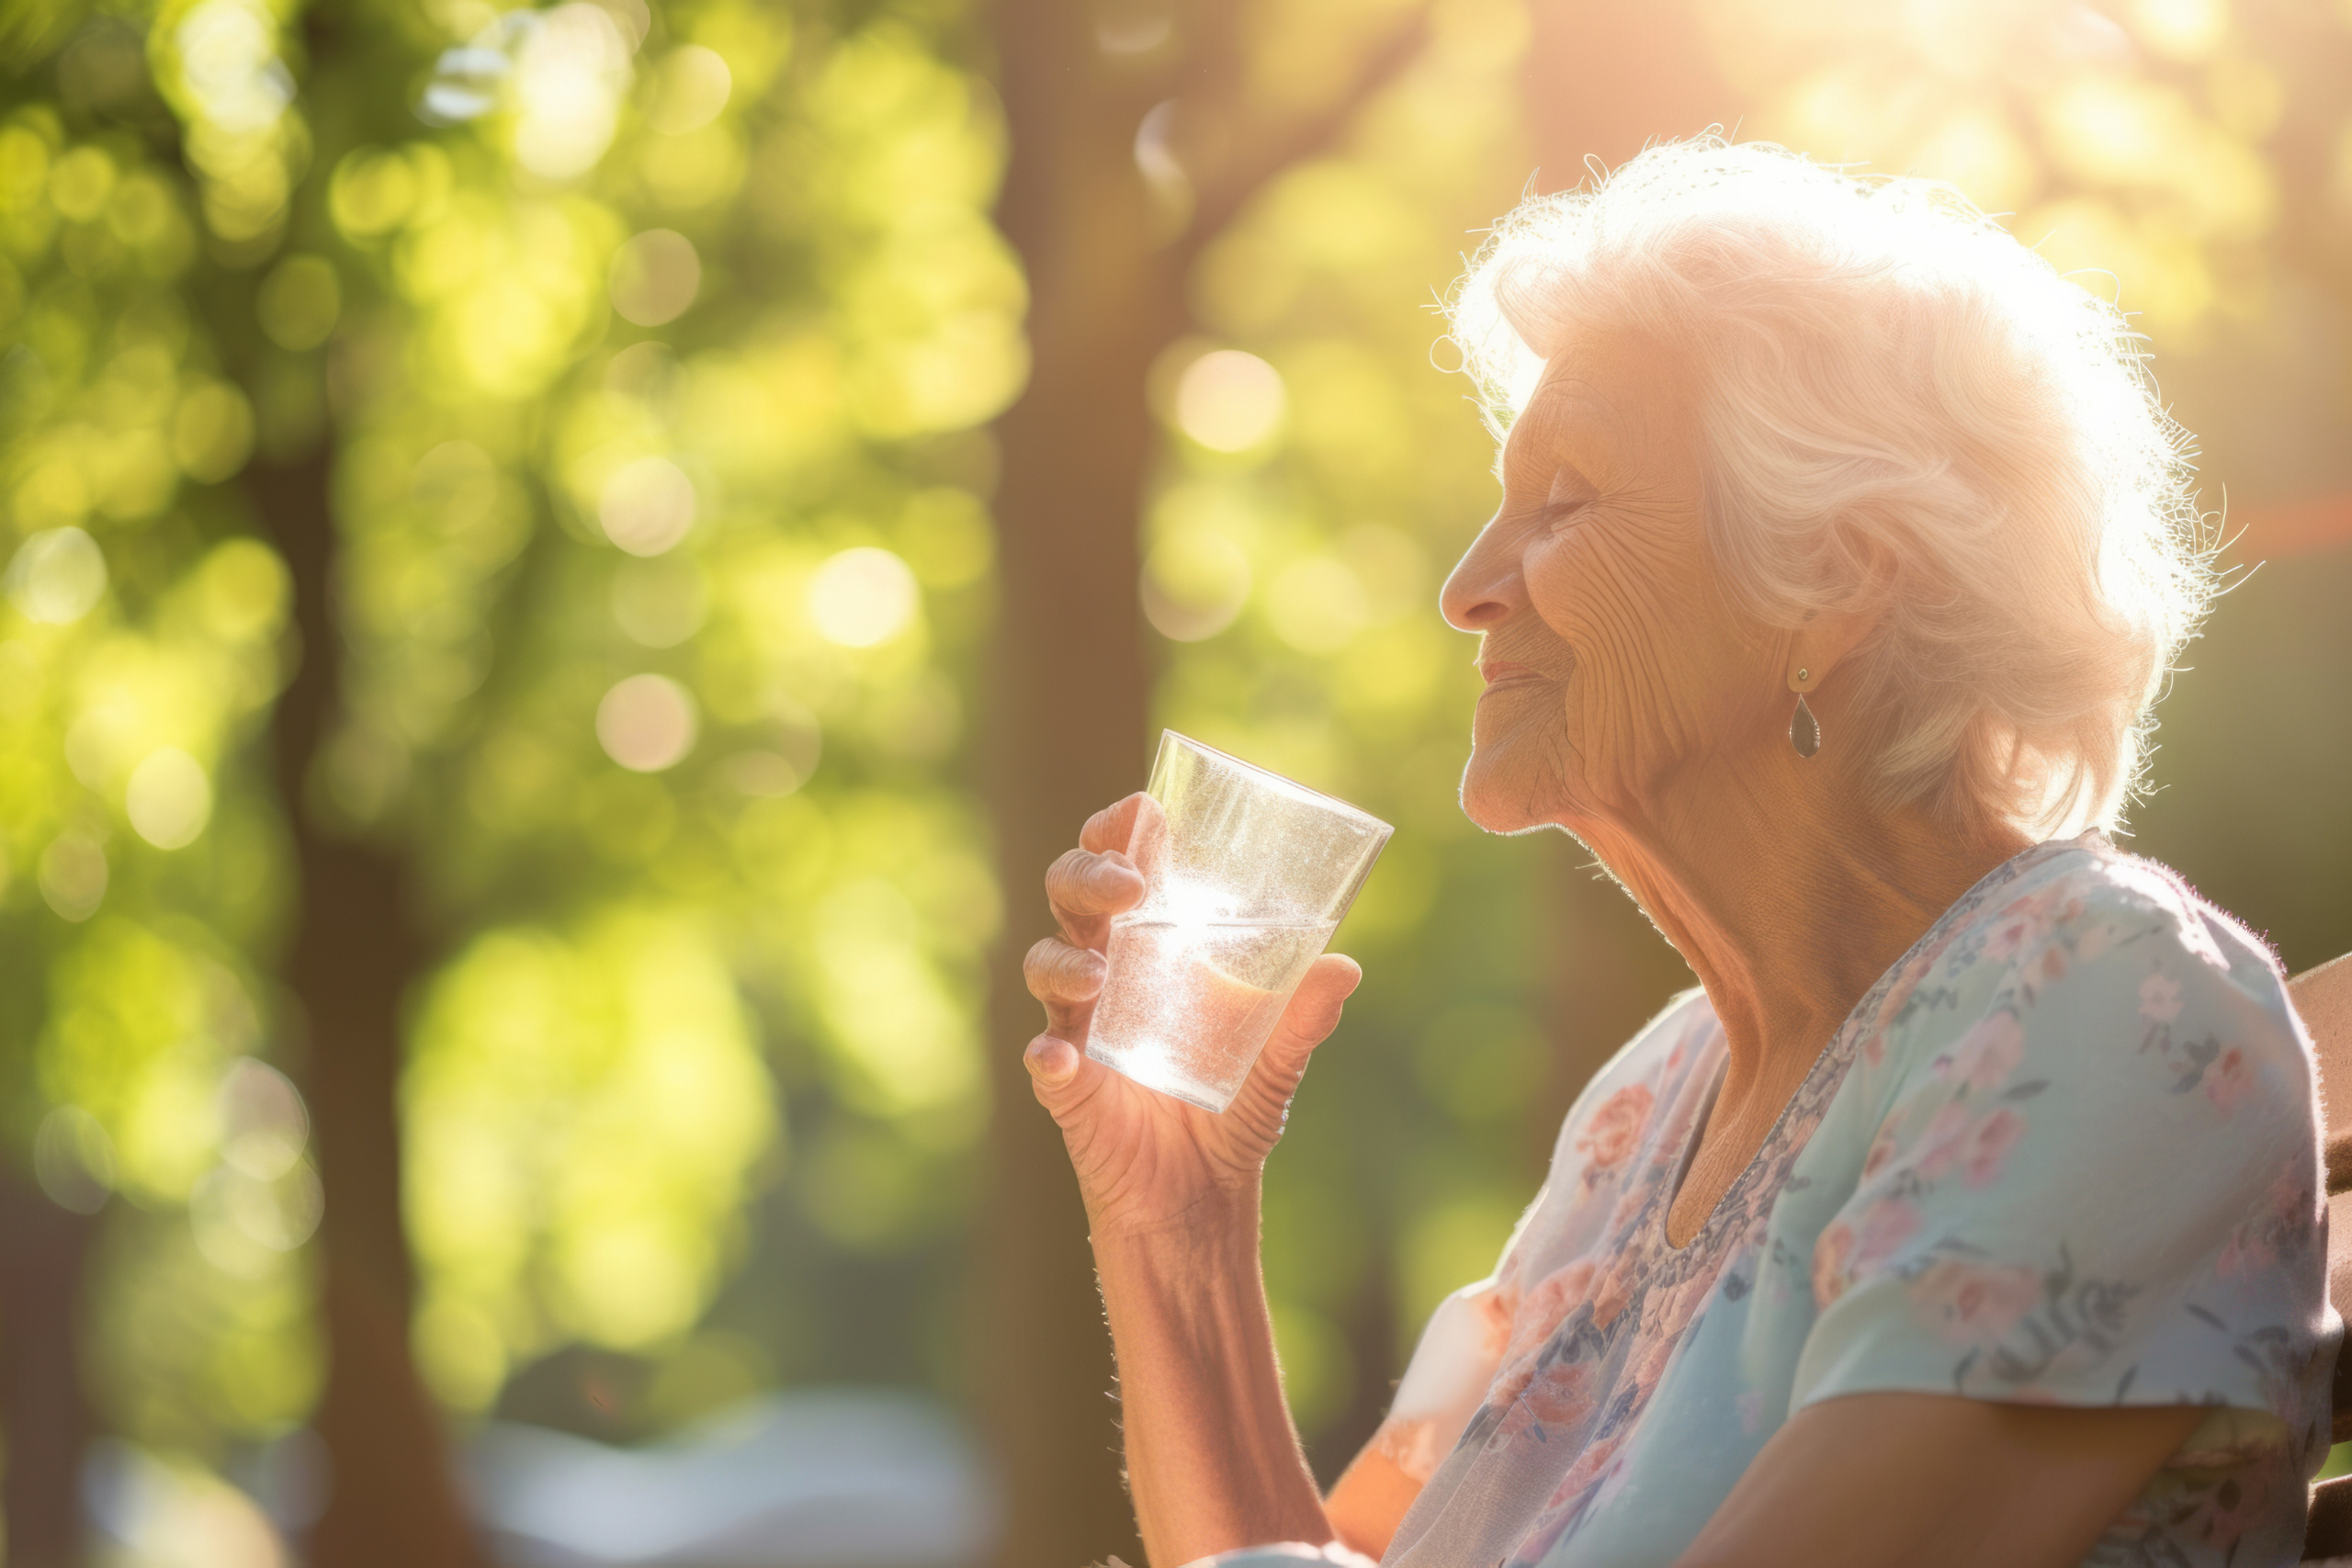 Hot Topic Summer Heatwave Safety Tips for BC Seniors